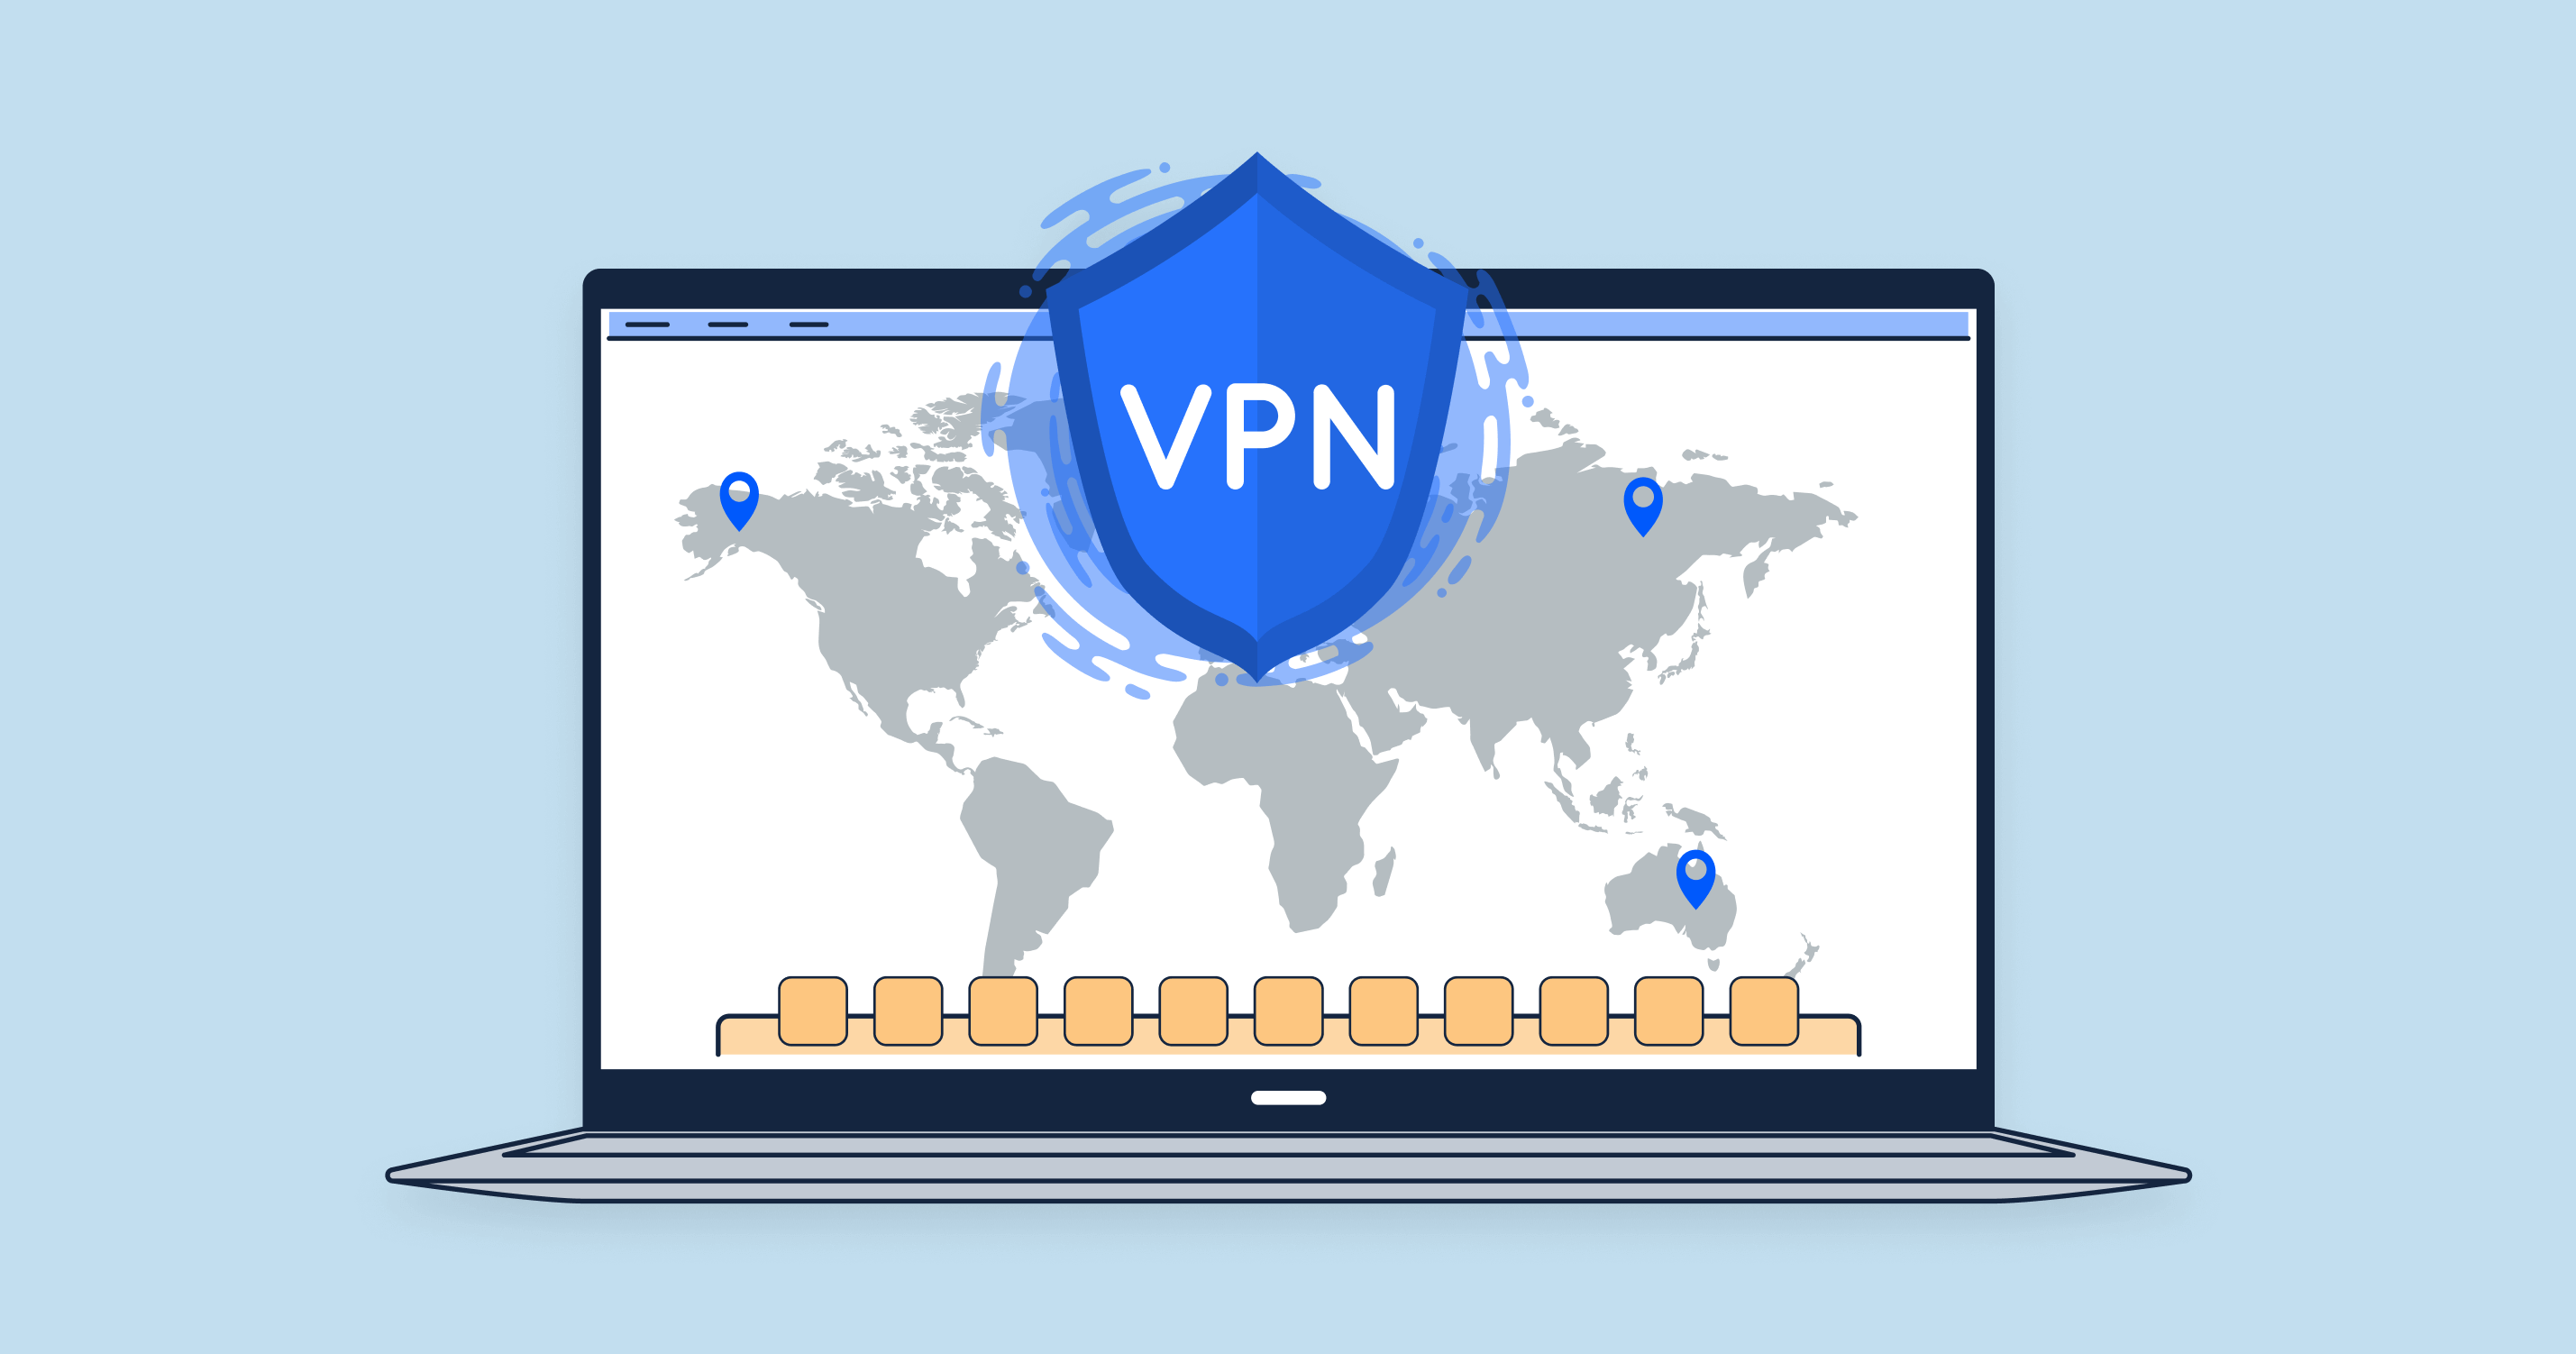 Trusted Free and Premium VPN Service - Privacy and Freedom